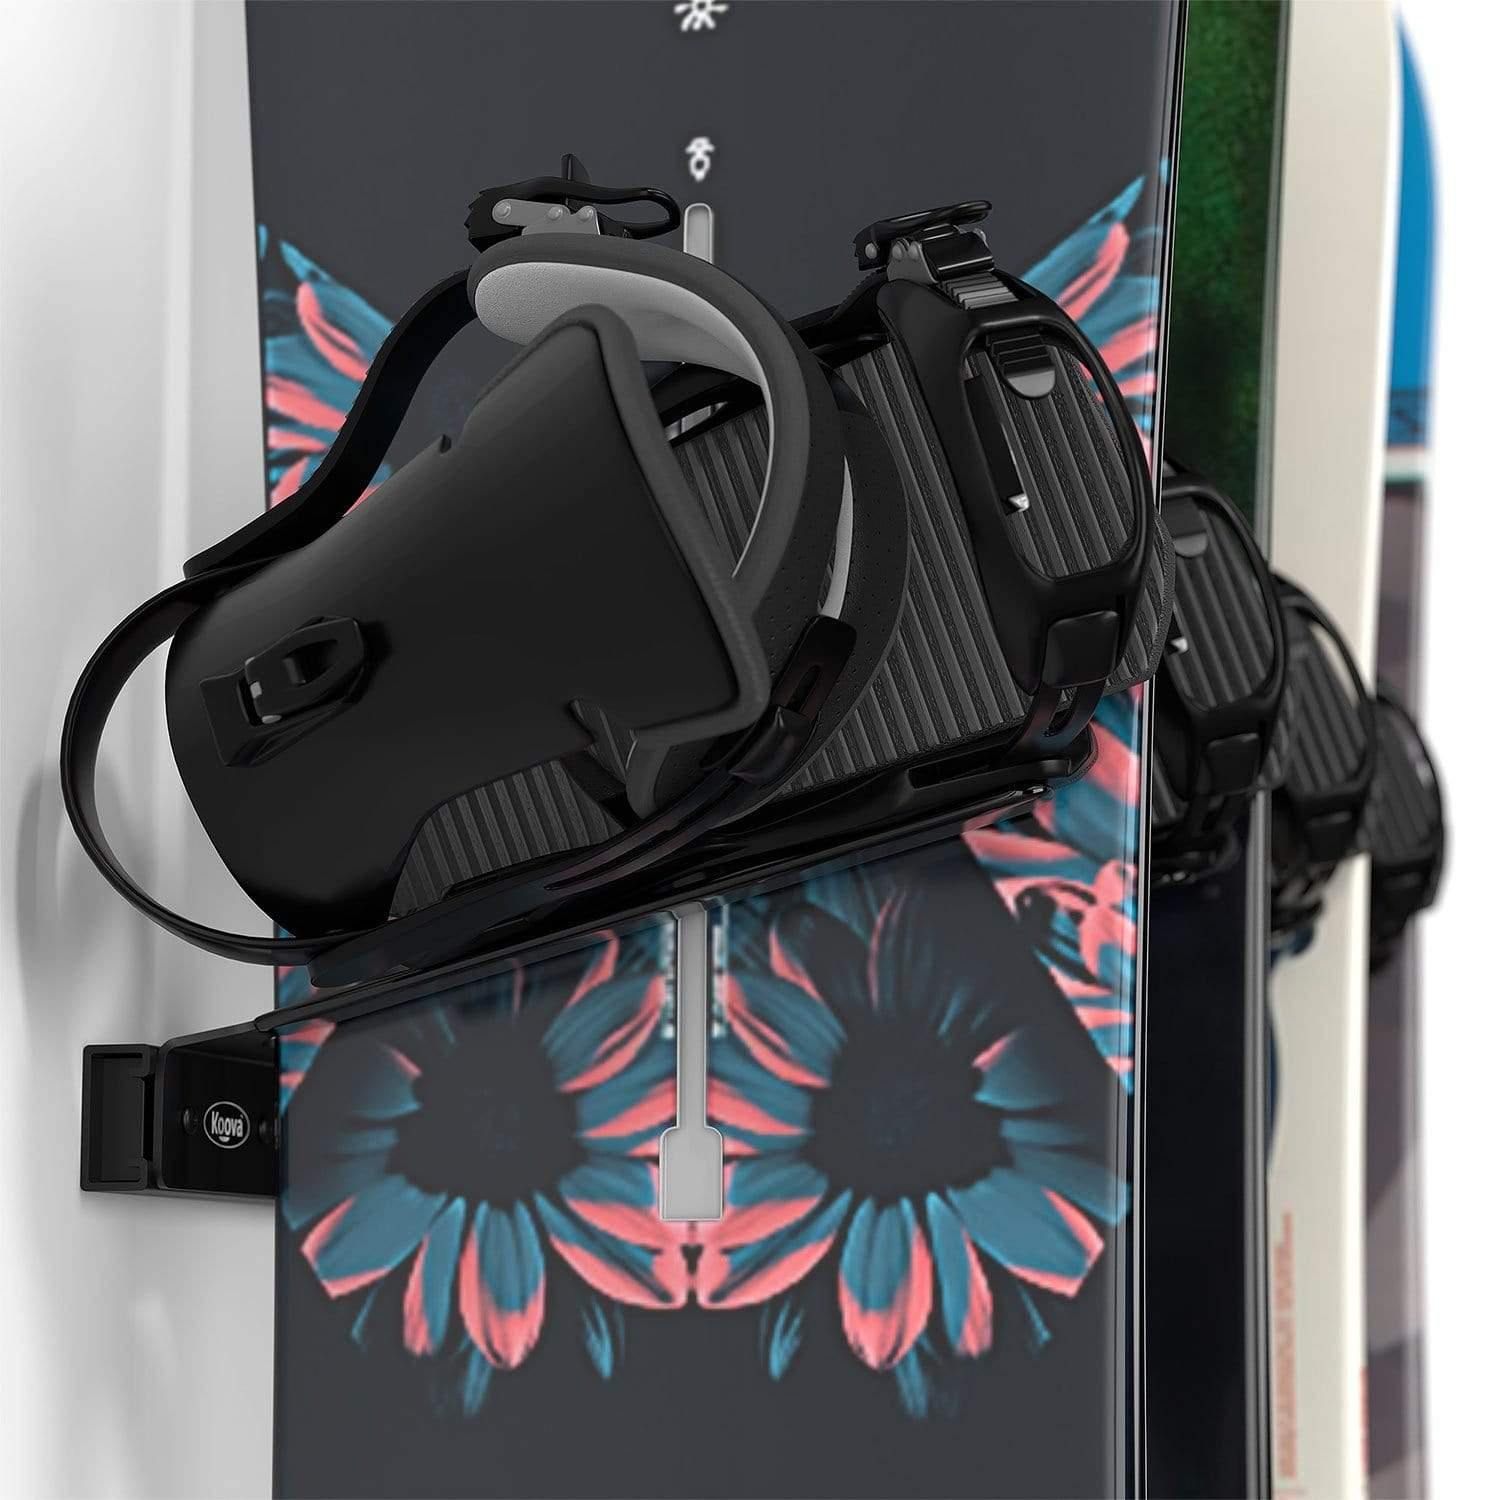 Wall mounted snowboard holder for up to 4 snowboards - store snowboards safely